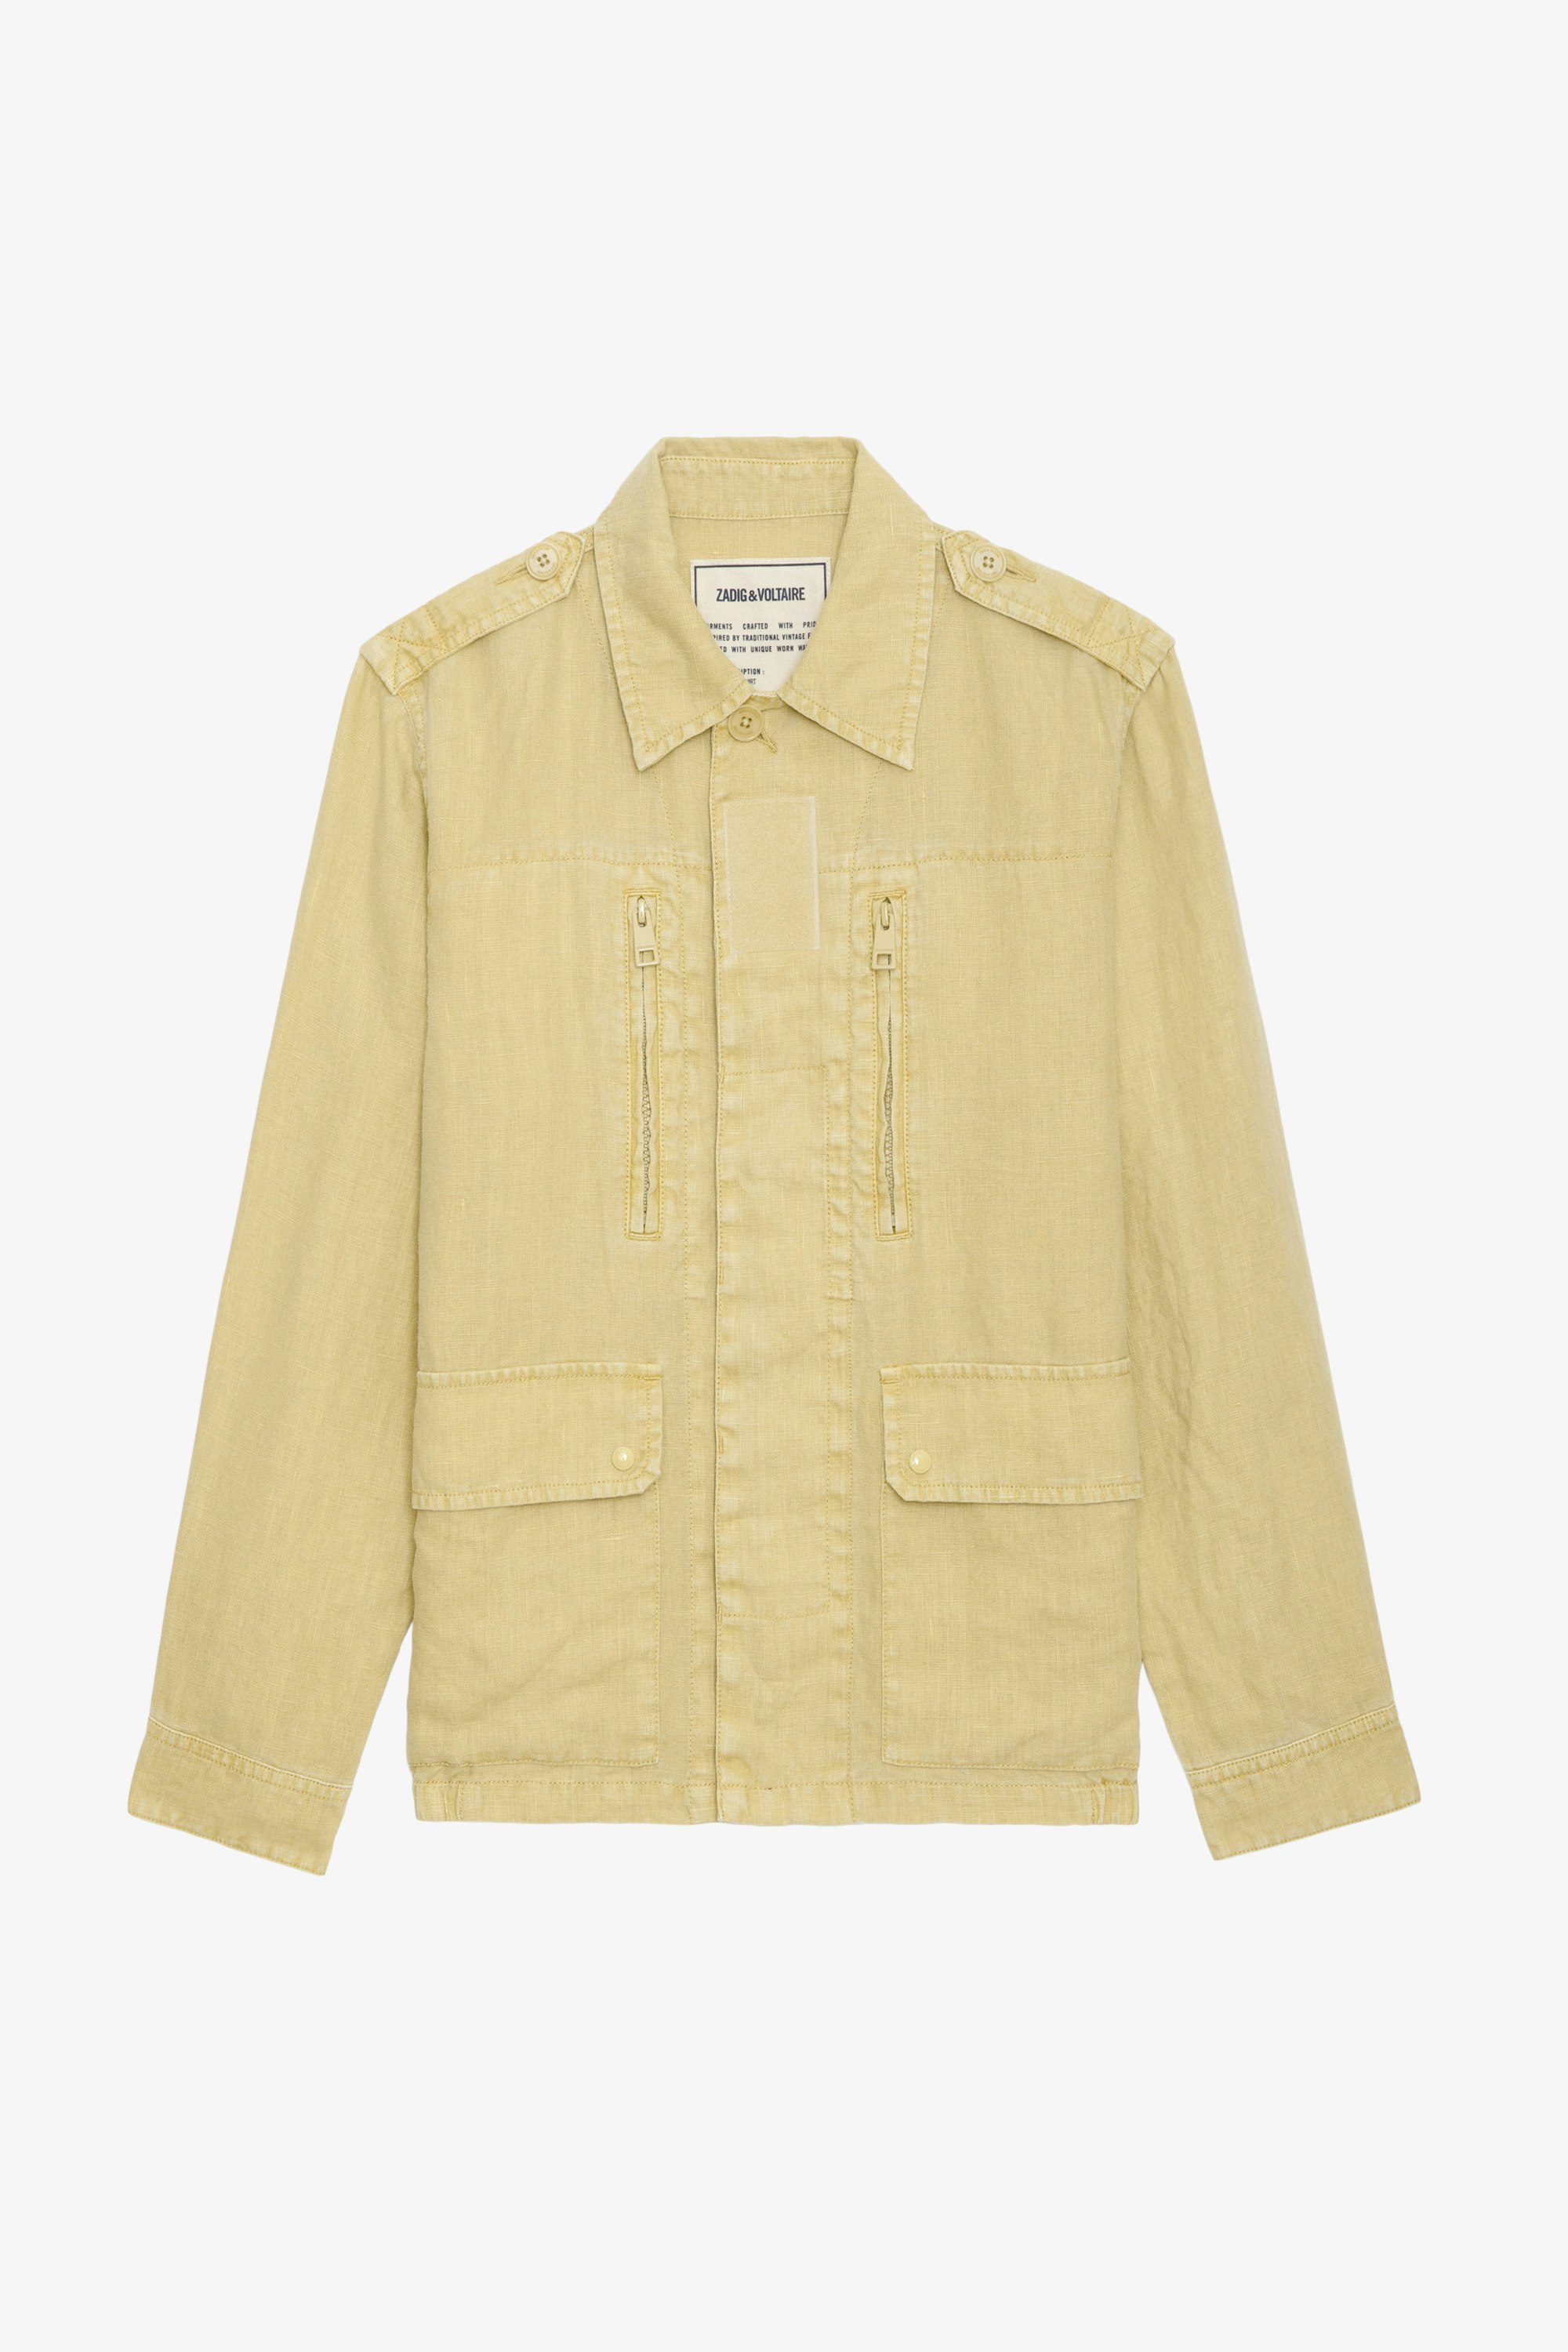 Kid Peace & Love Linen Jacket - Light yellow linen military jacket with pockets and “Peace Love” wings motif on the back.